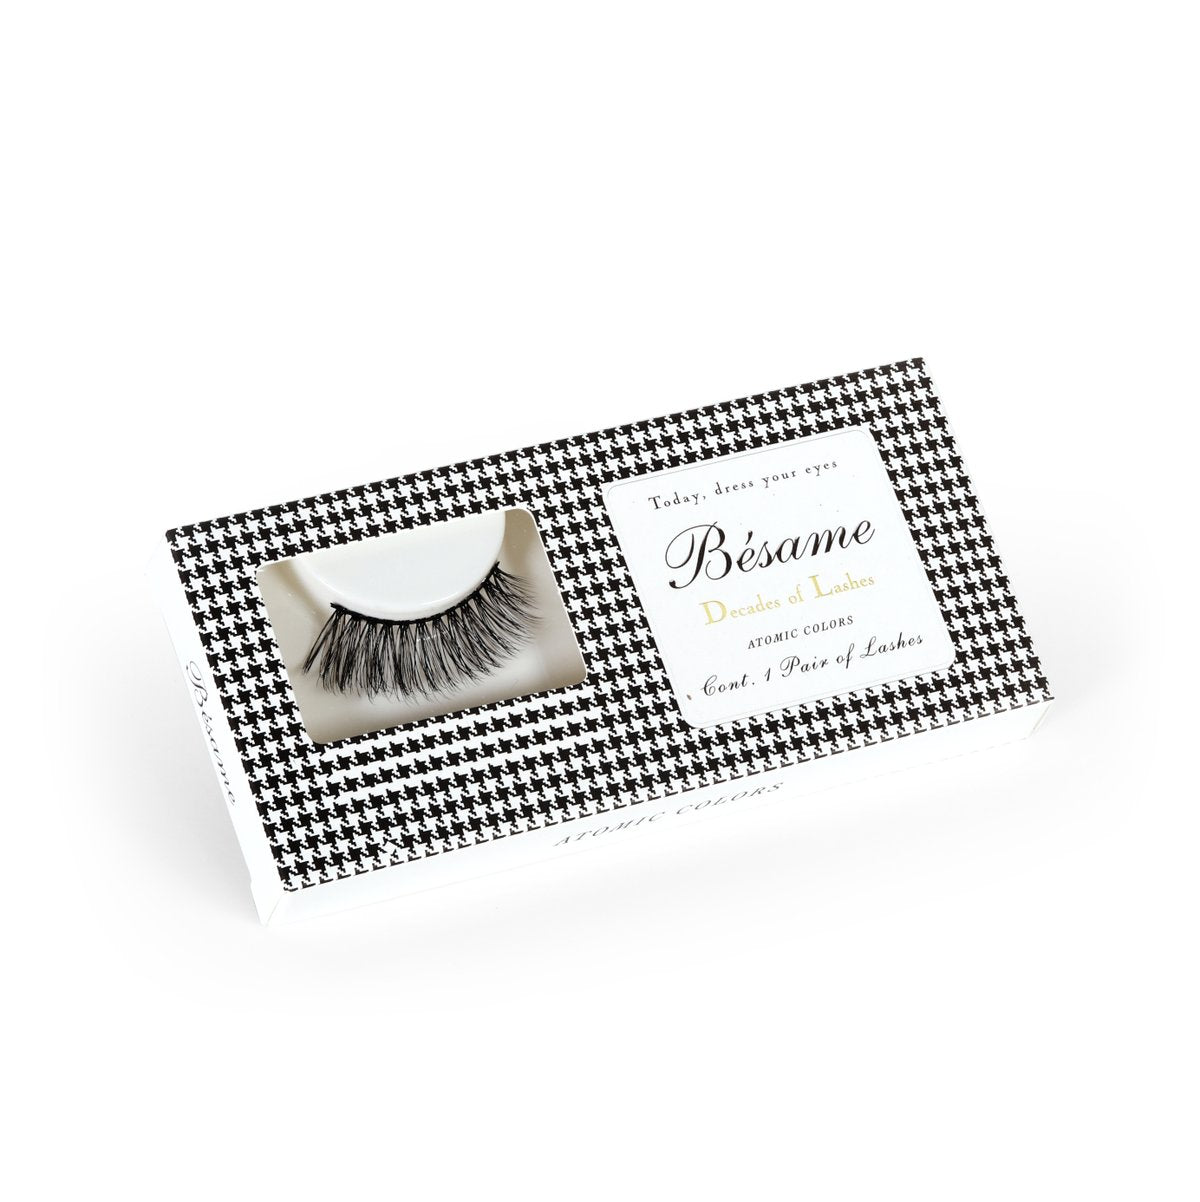 Besame 1950s Lashes "Atomic Colors"